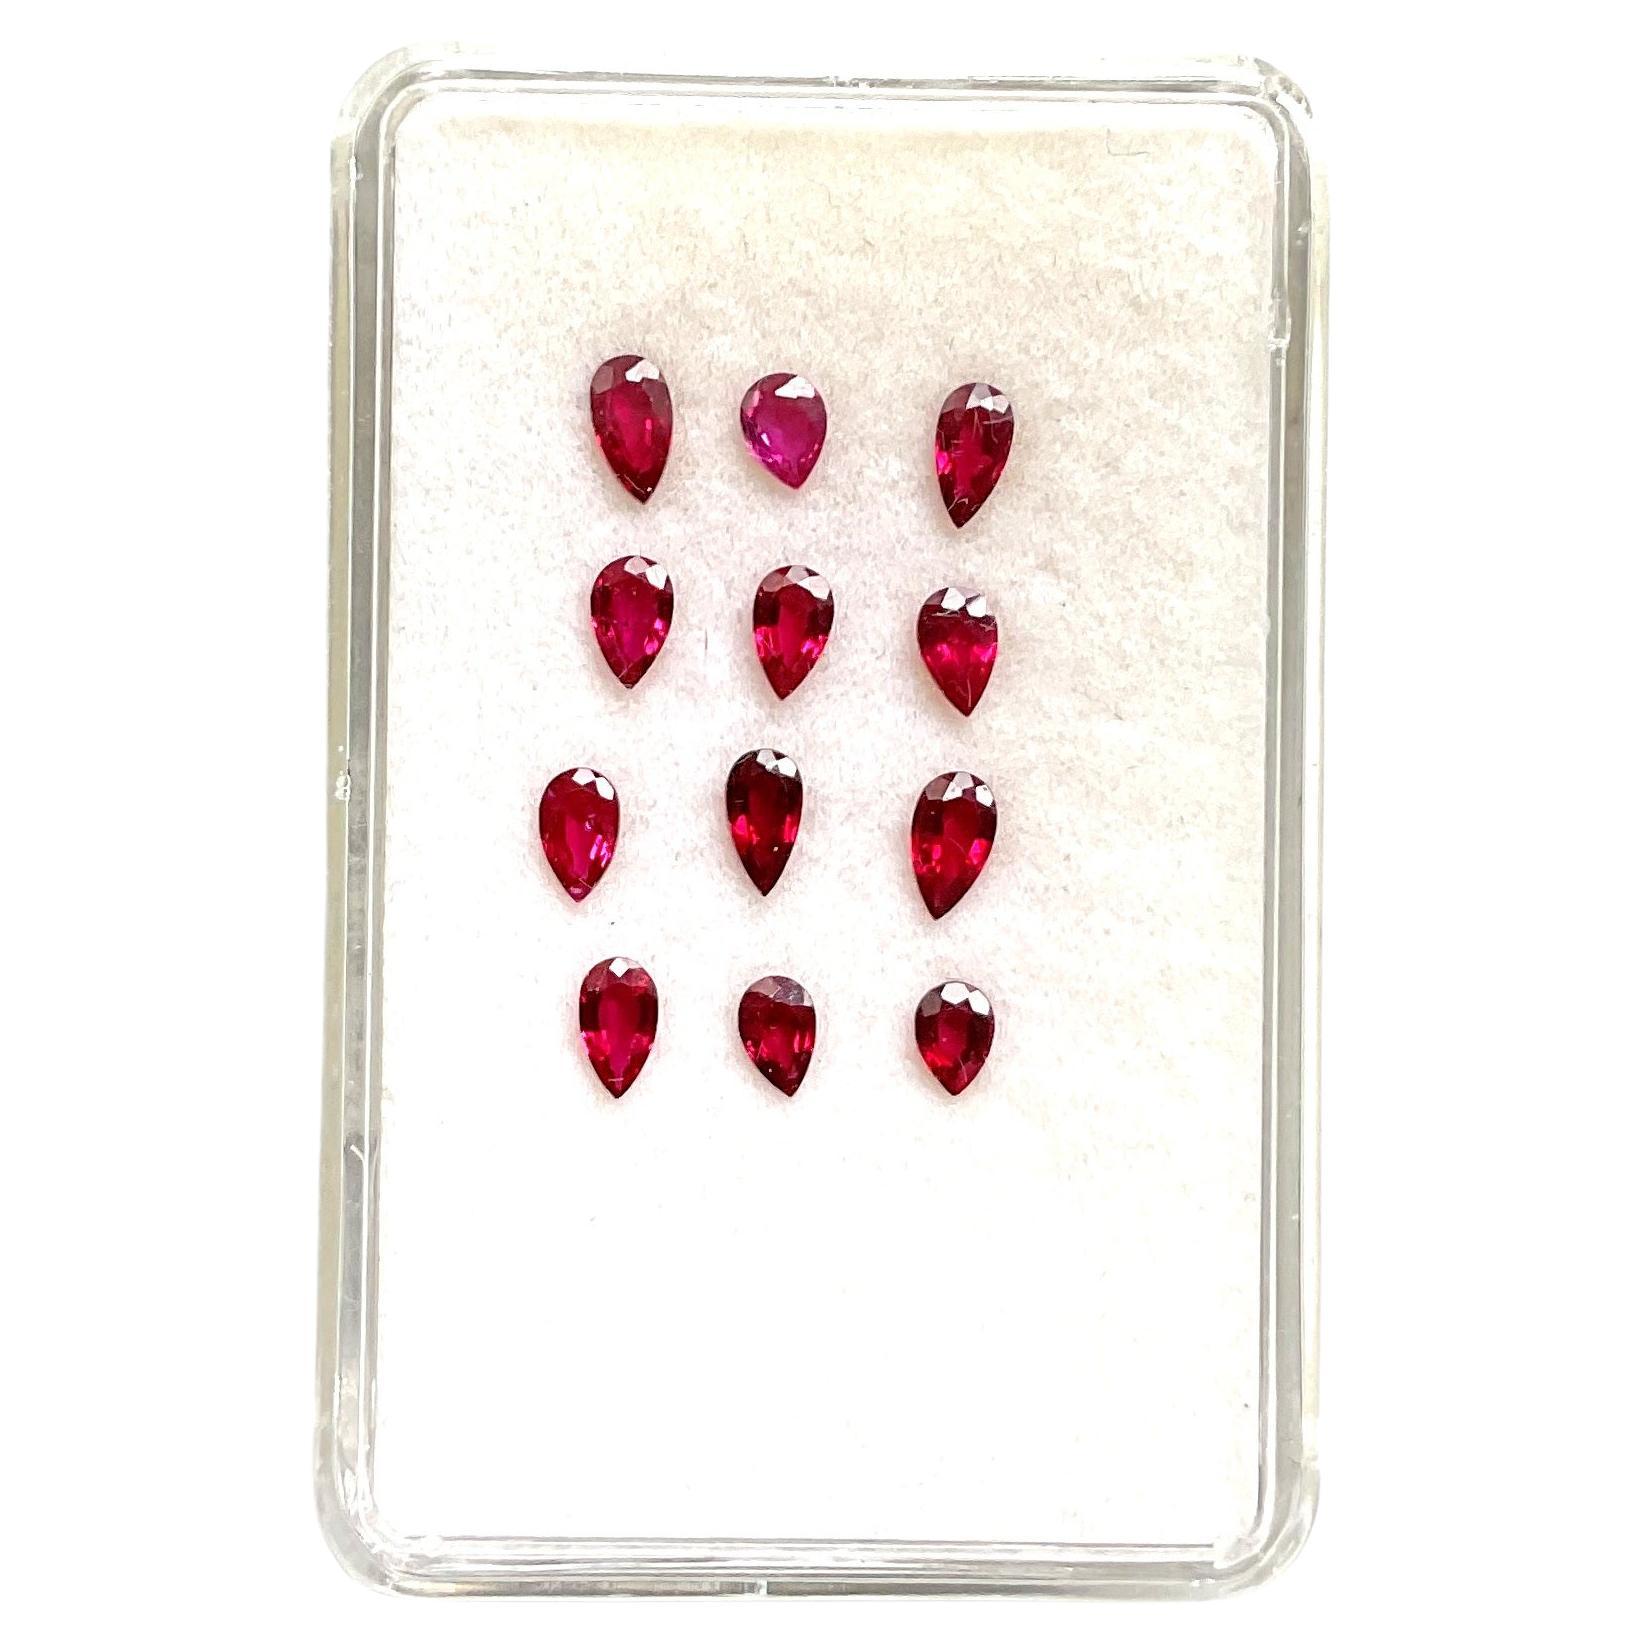 2.63 Carats Mozambique Ruby Top Quality Pear Cut stone No Heat Natural Gemstone For Sale